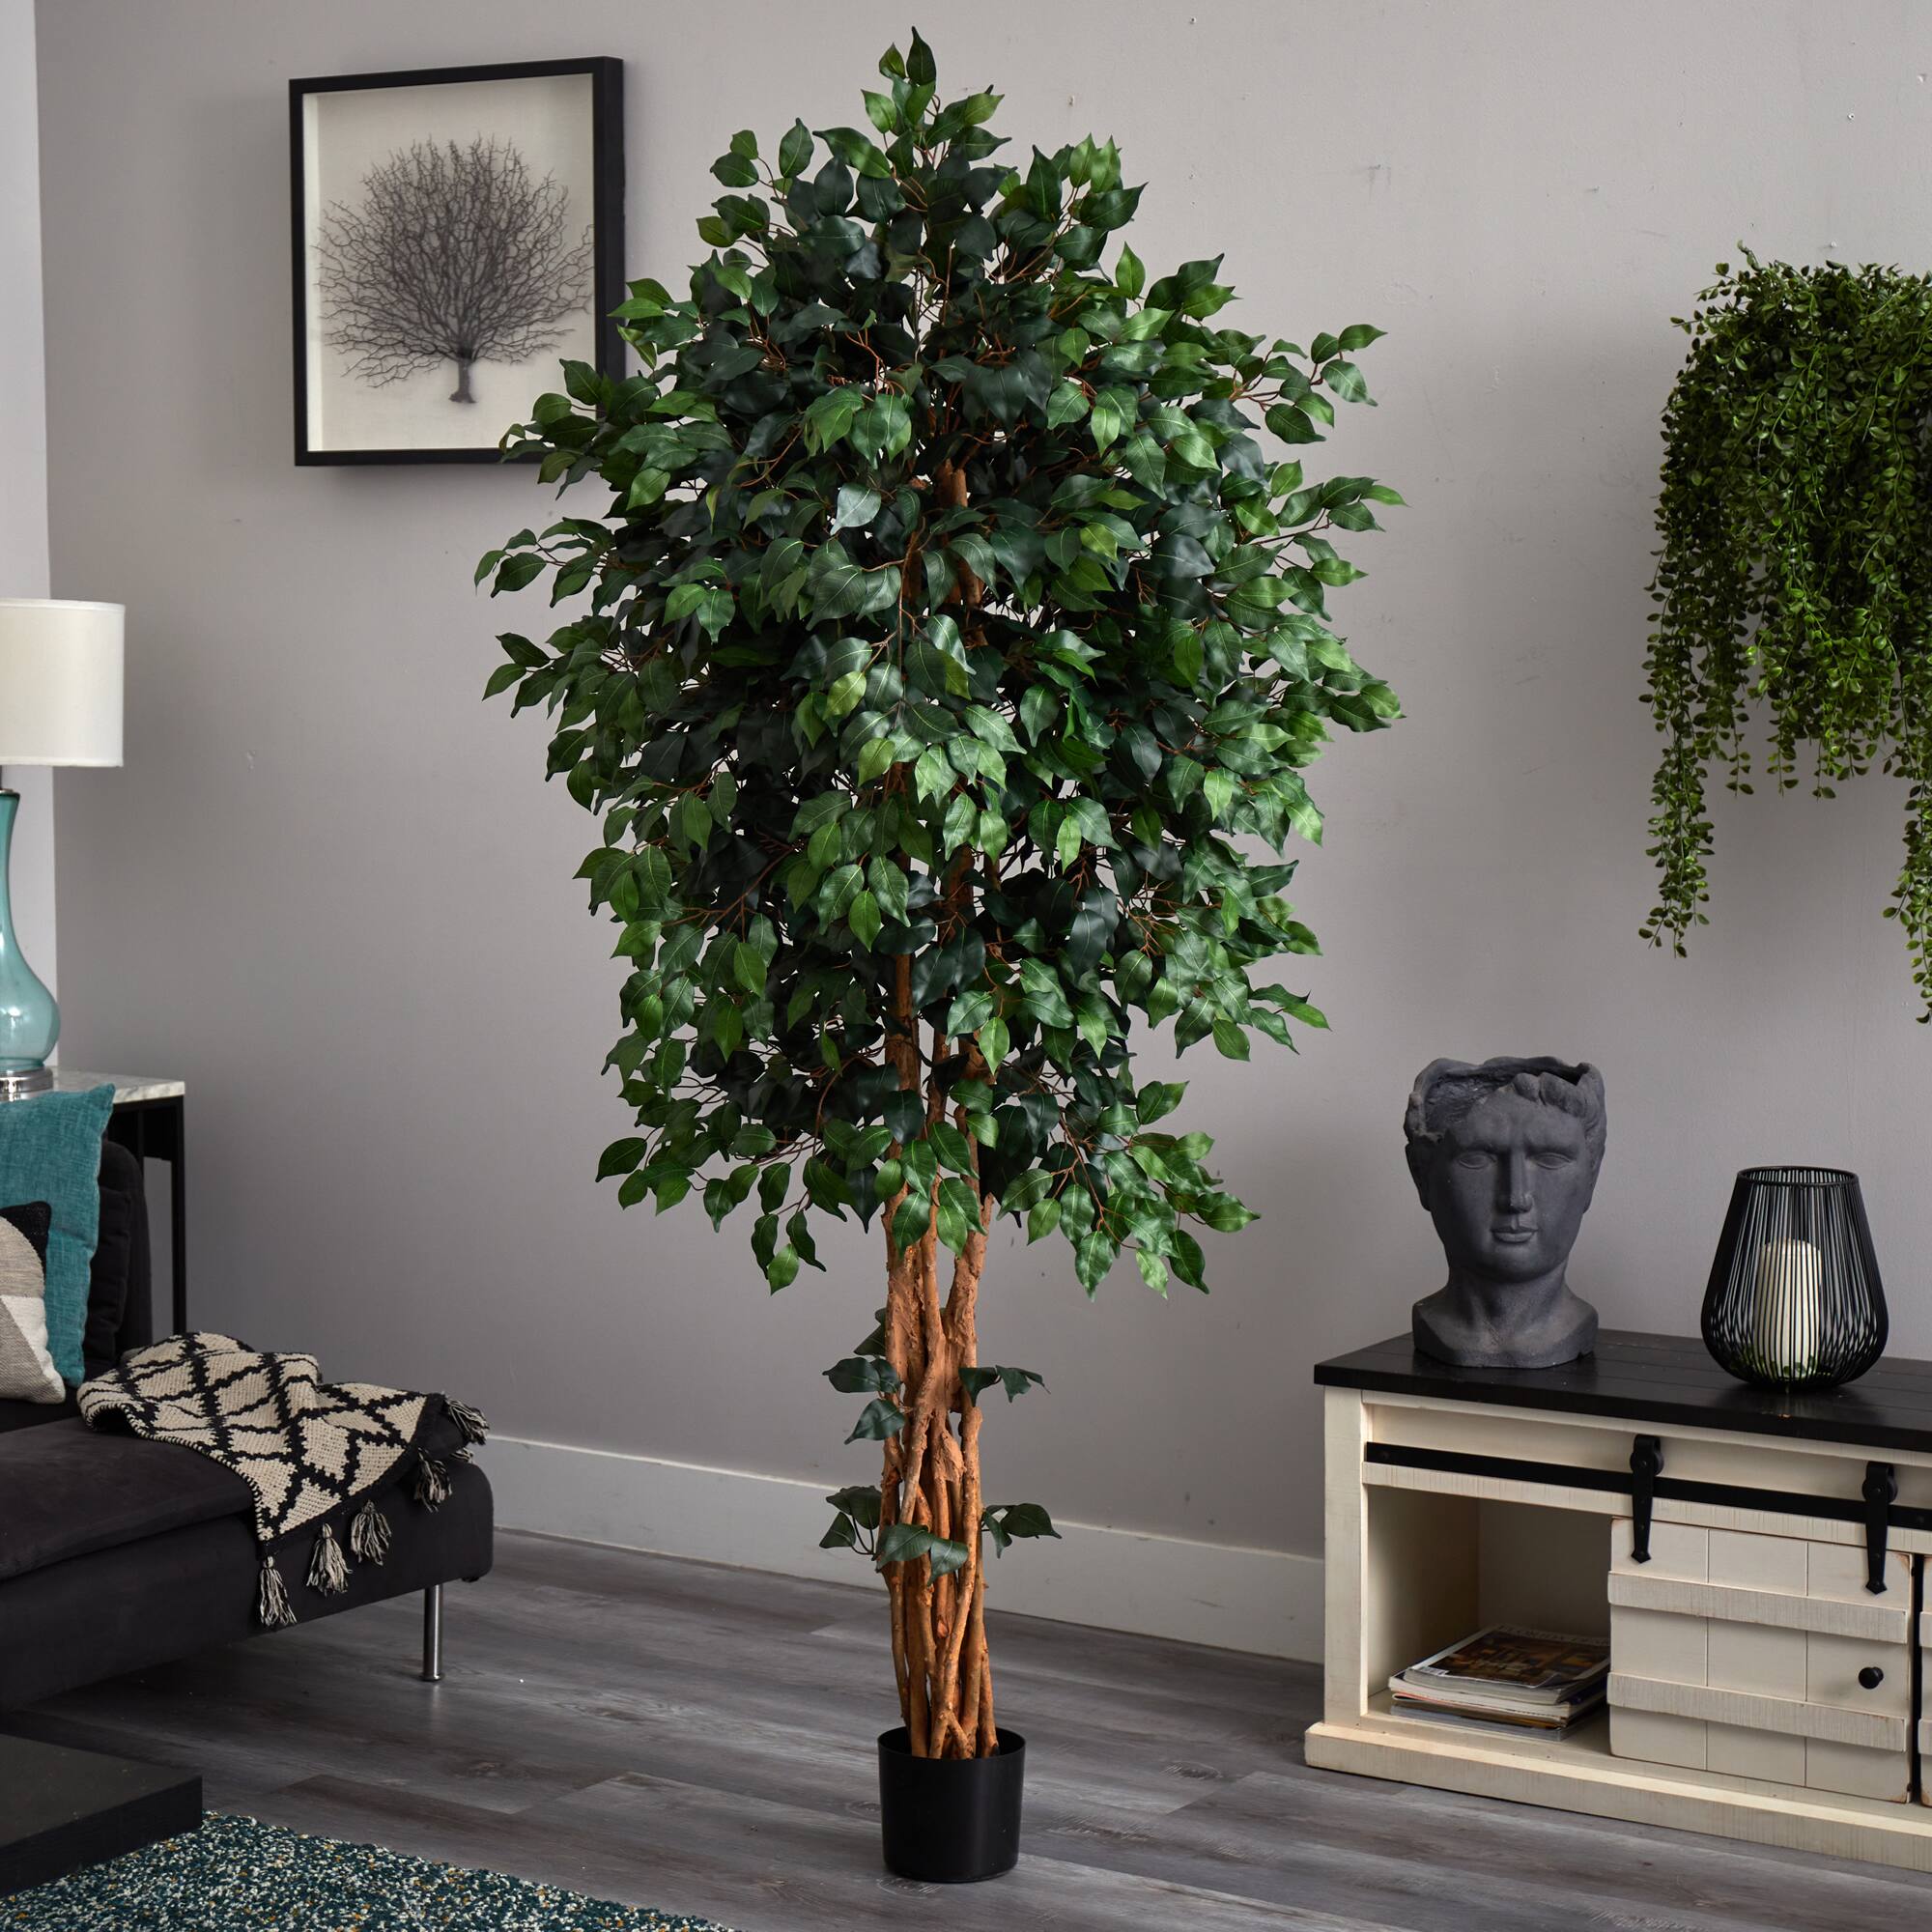 6ft. Potted Palace Style Ficus Tree